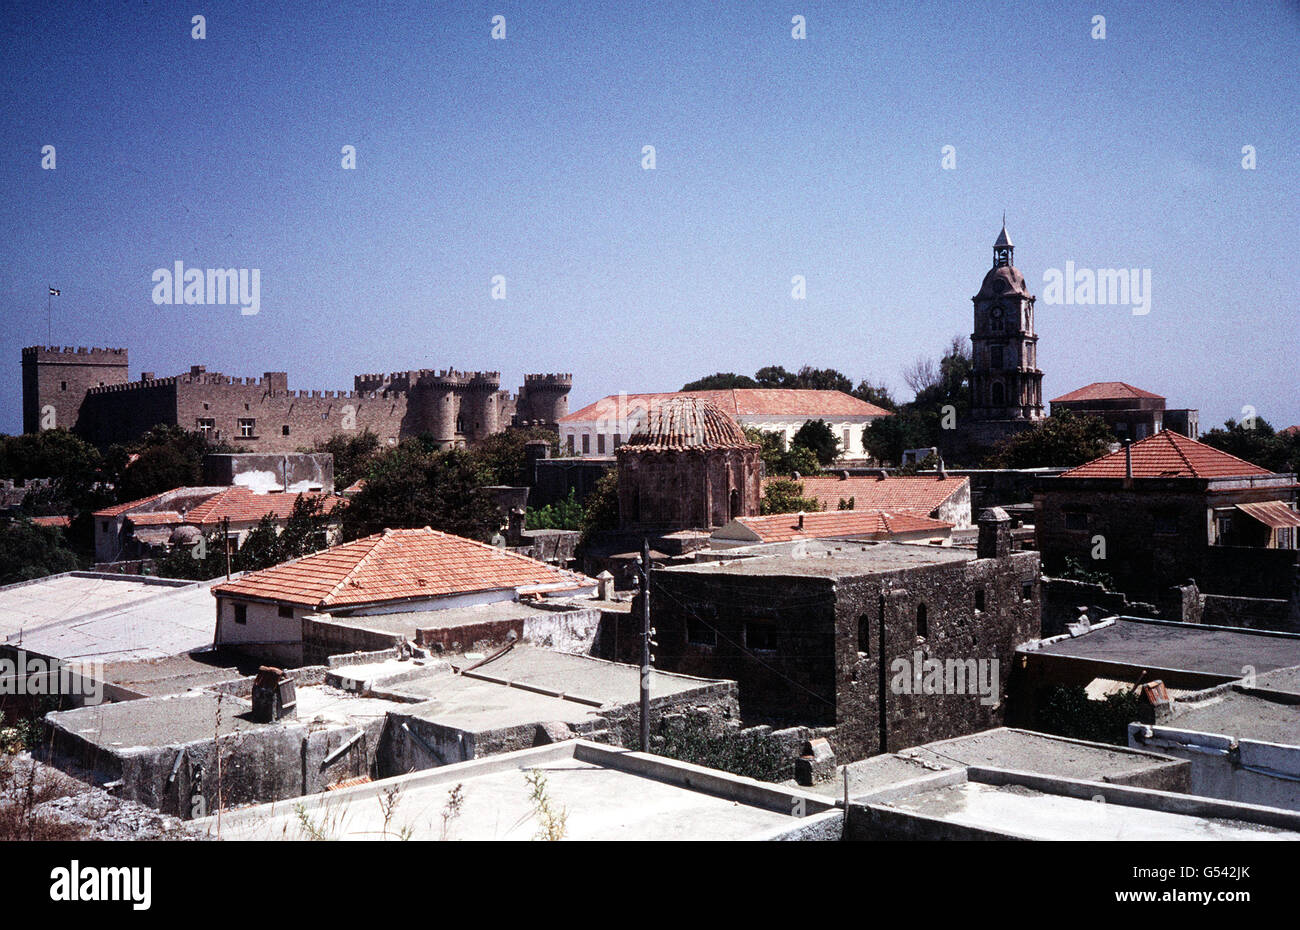 RHODES: Rooftops in the old city of Rhodes. In the distance is Palace of the Grand Masters, built by the Knight Hospitallers (Order of St. John). Rhodes was the most important base for the Order until the knights' expulsion by the Turkish Sultan, Suleiman the Magnificent, in 1522. The castle was heavily restored during the Italian occupation of the Dodecanese in the early 20th century. Stock Photo